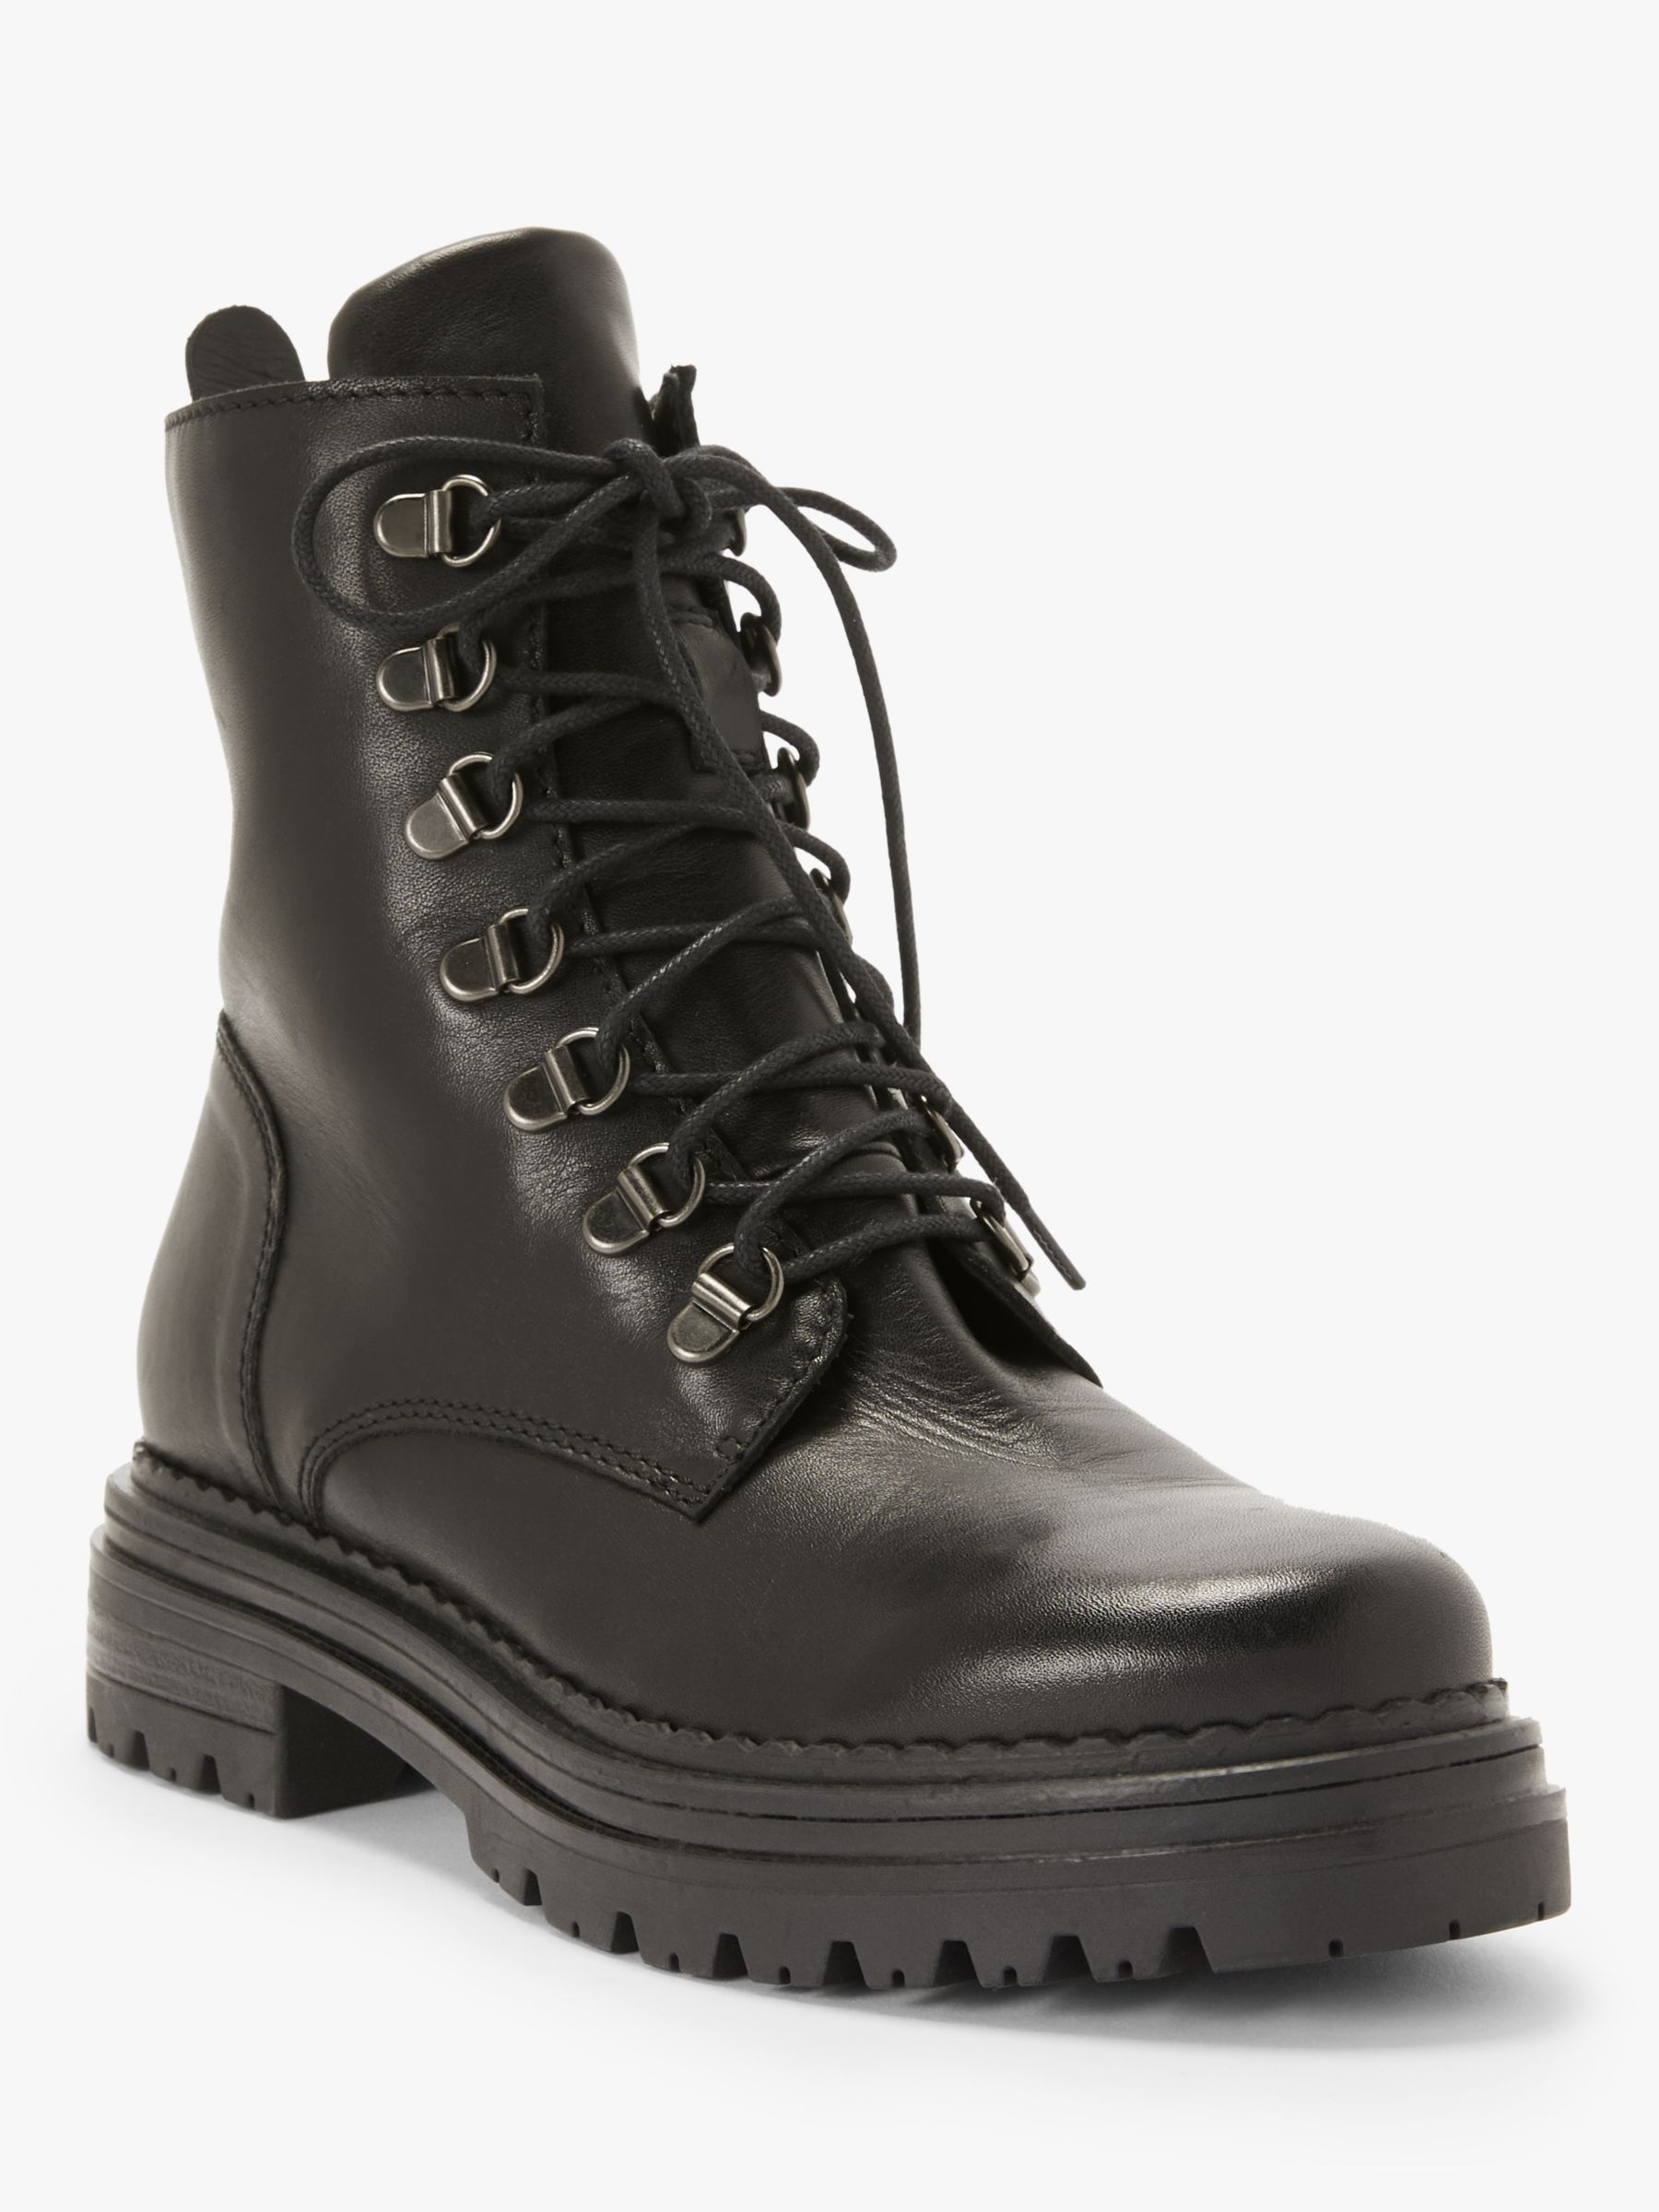 AND/OR Rudi Leather Lace Up Hiking Boots